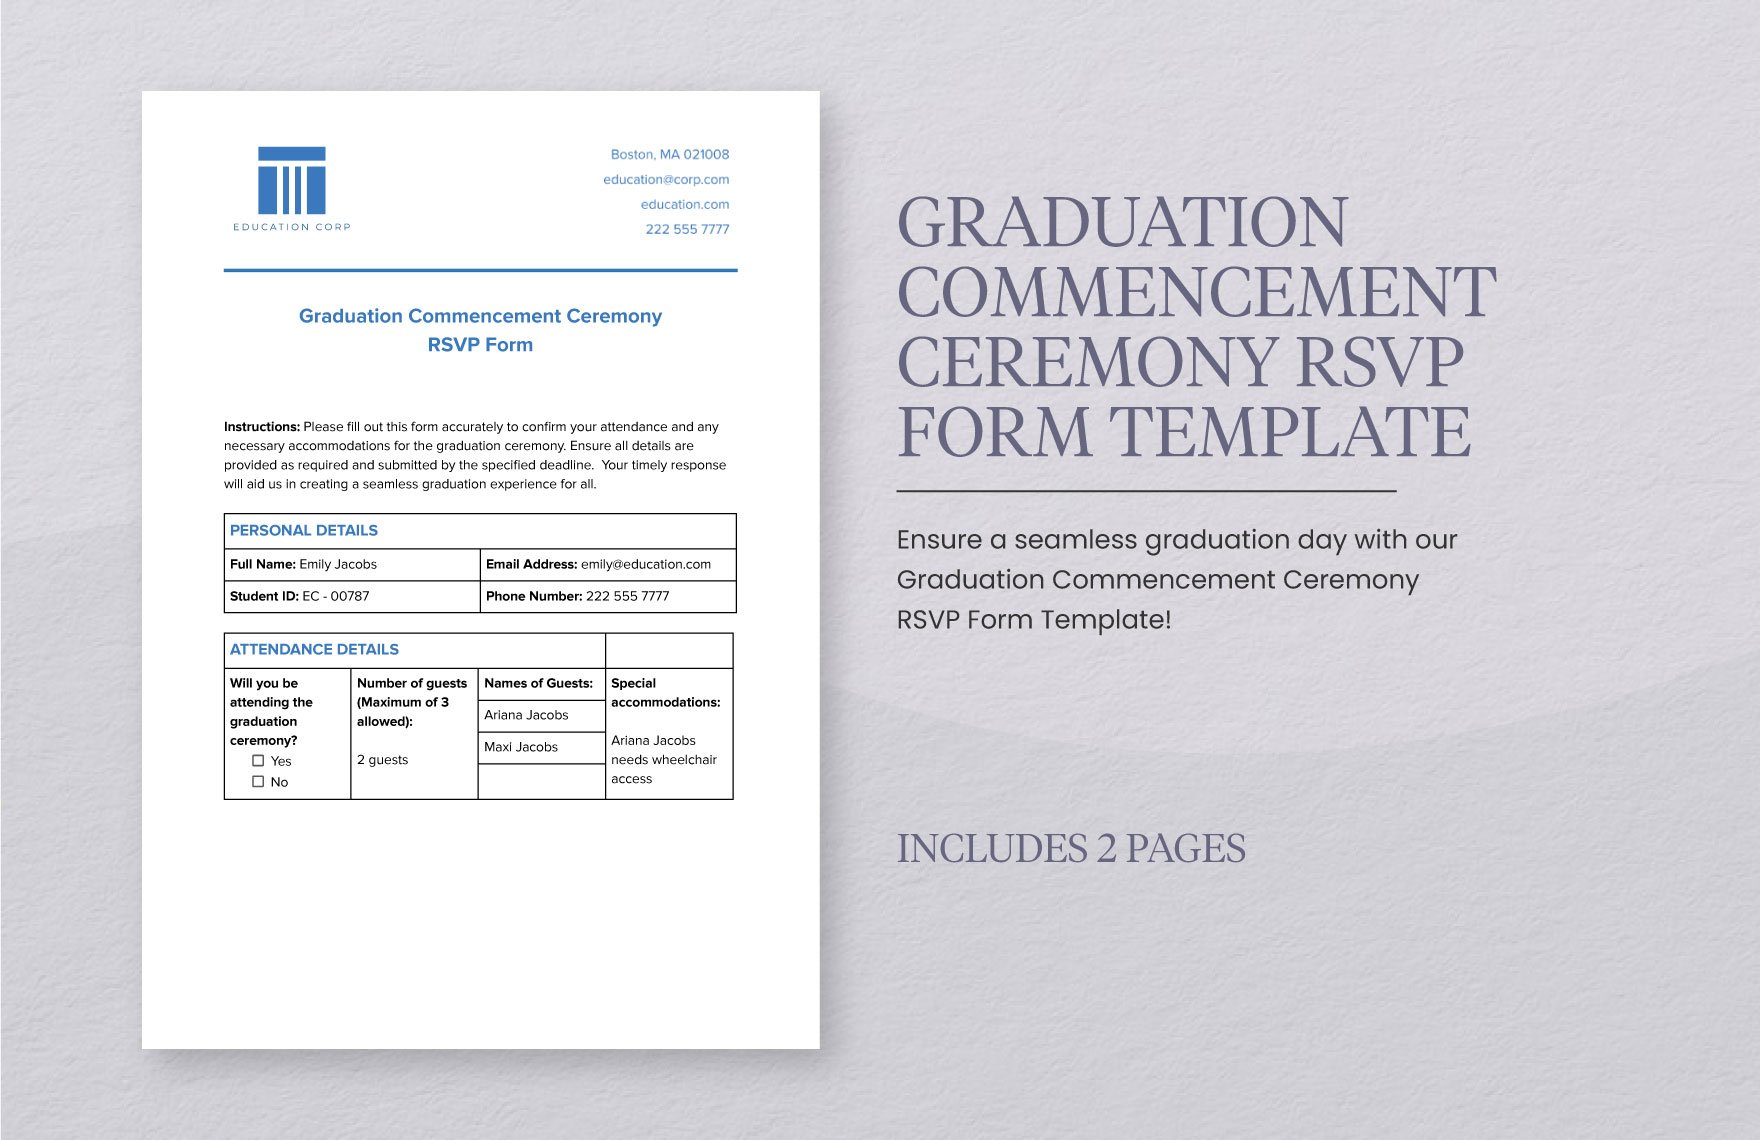 Graduation Commencement Ceremony RSVP Form Template in Word PDF